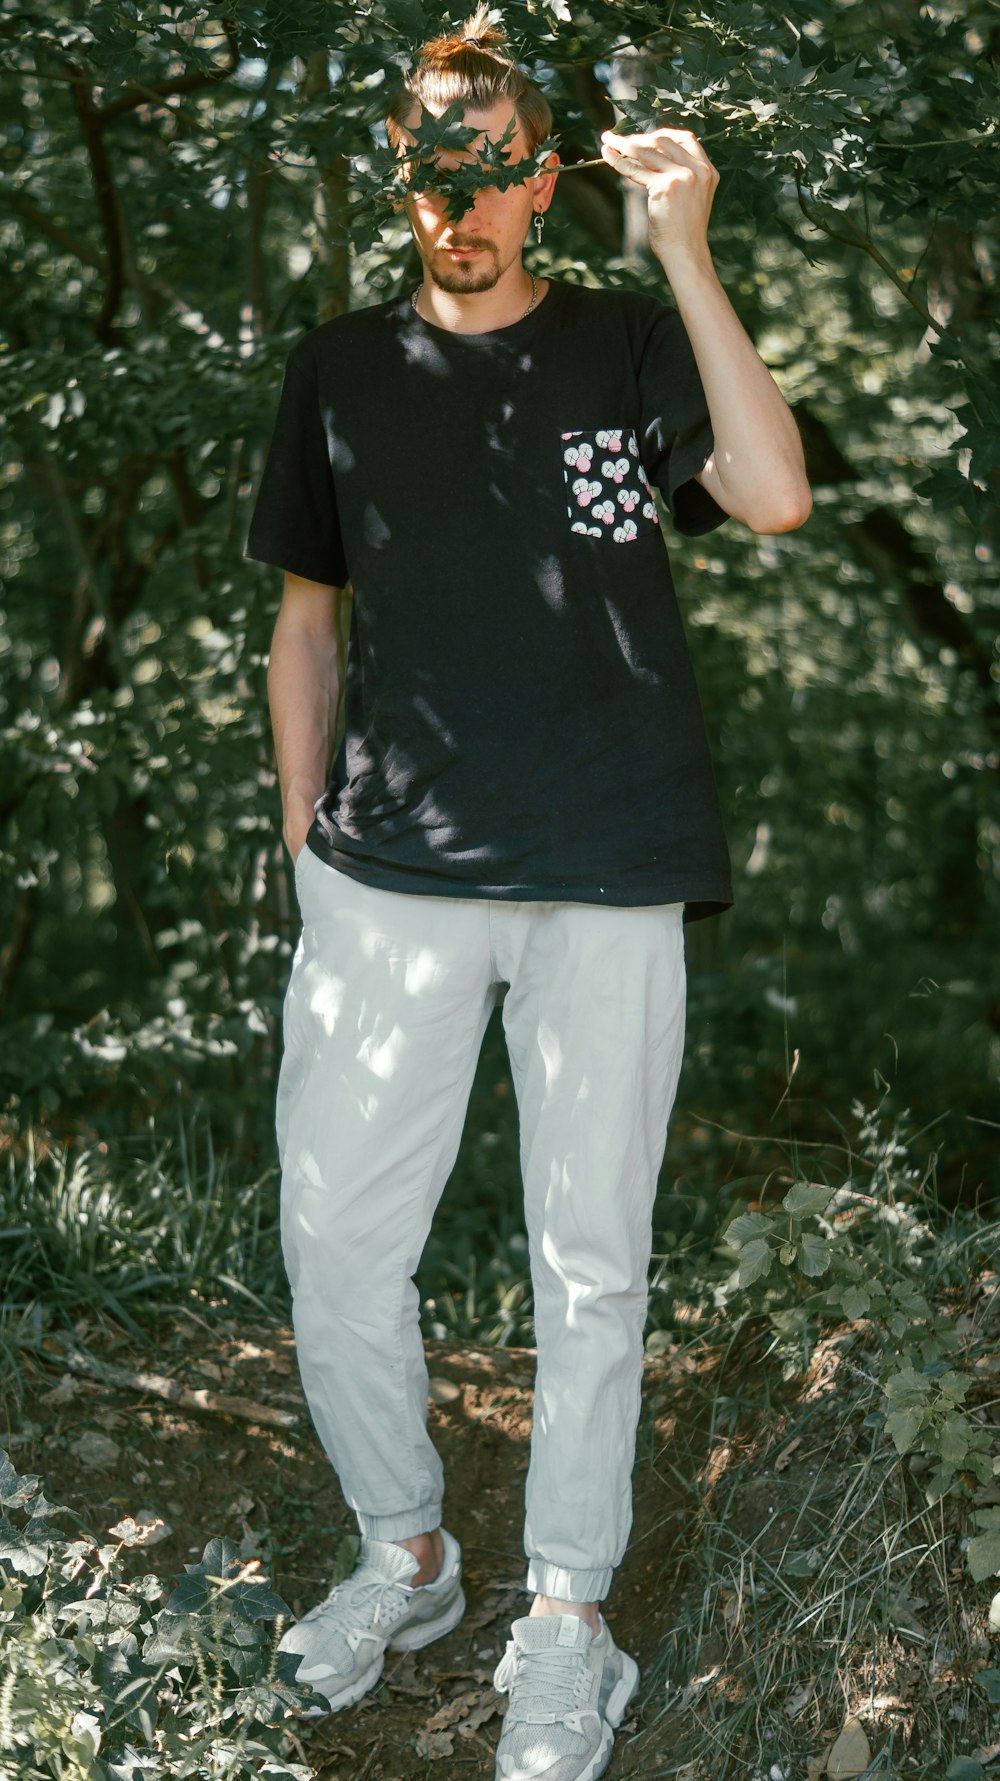 man in black crew neck t-shirt and white pants standing on green grass field during